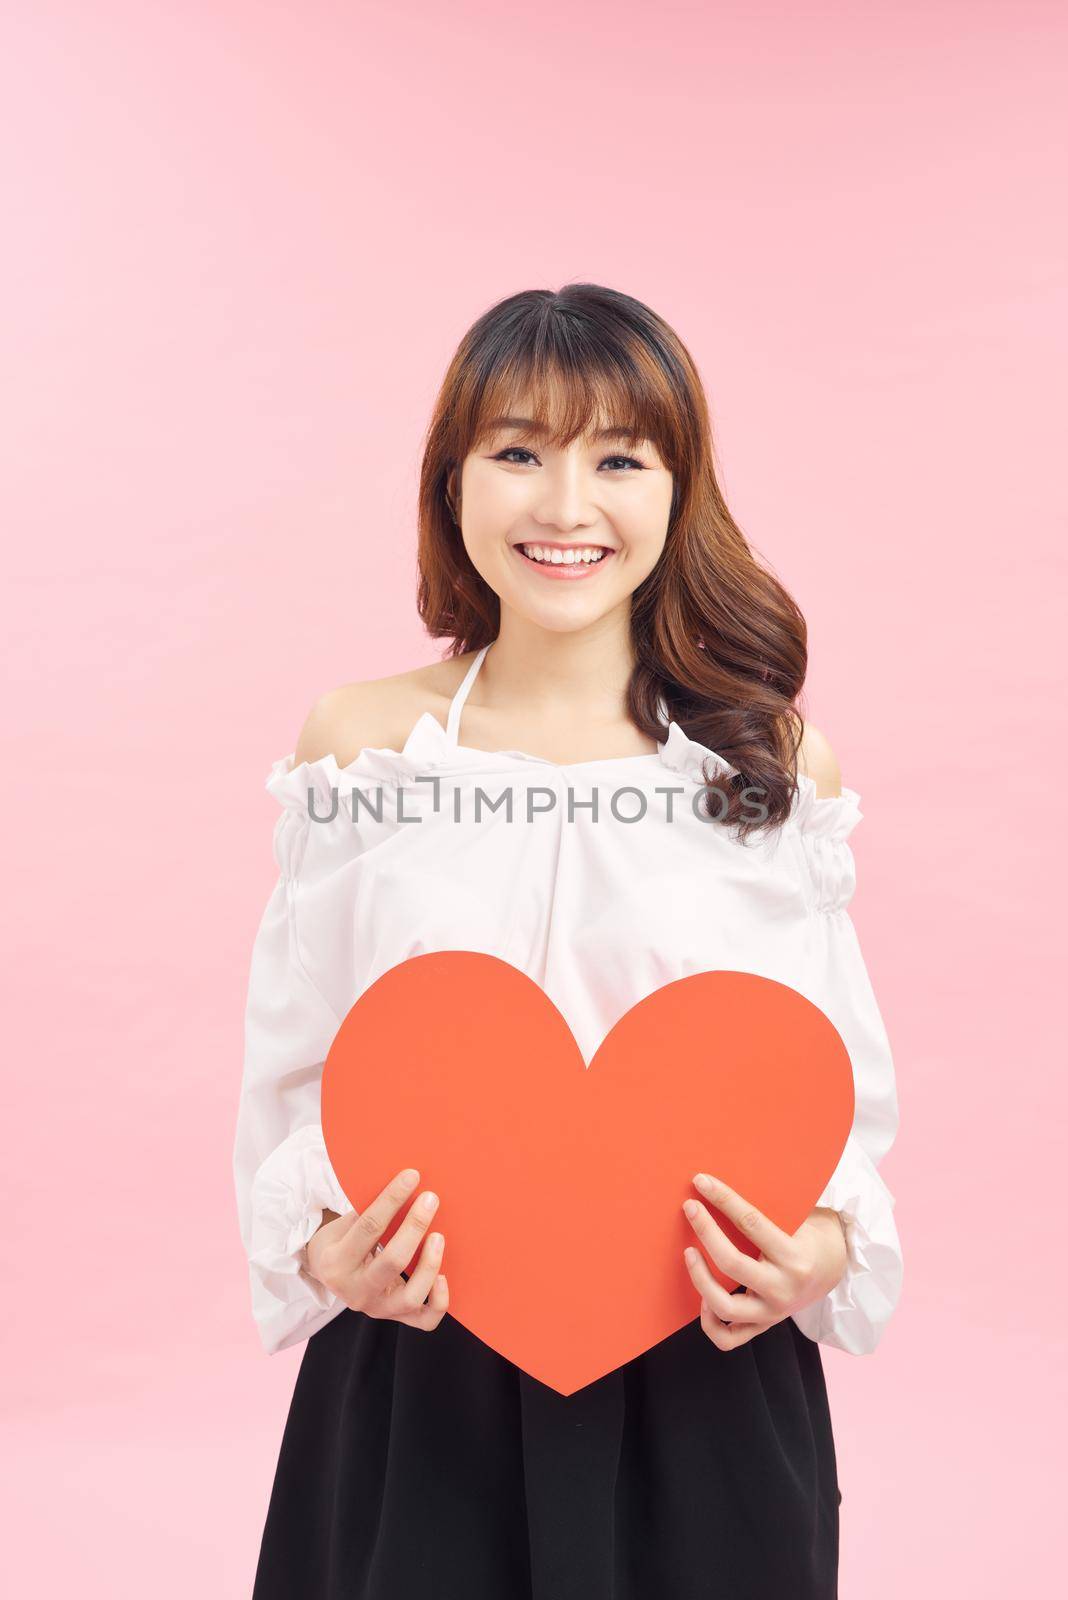 Beautiful asian girl with a card in the shape of a heart in her hands on a pink background. by makidotvn